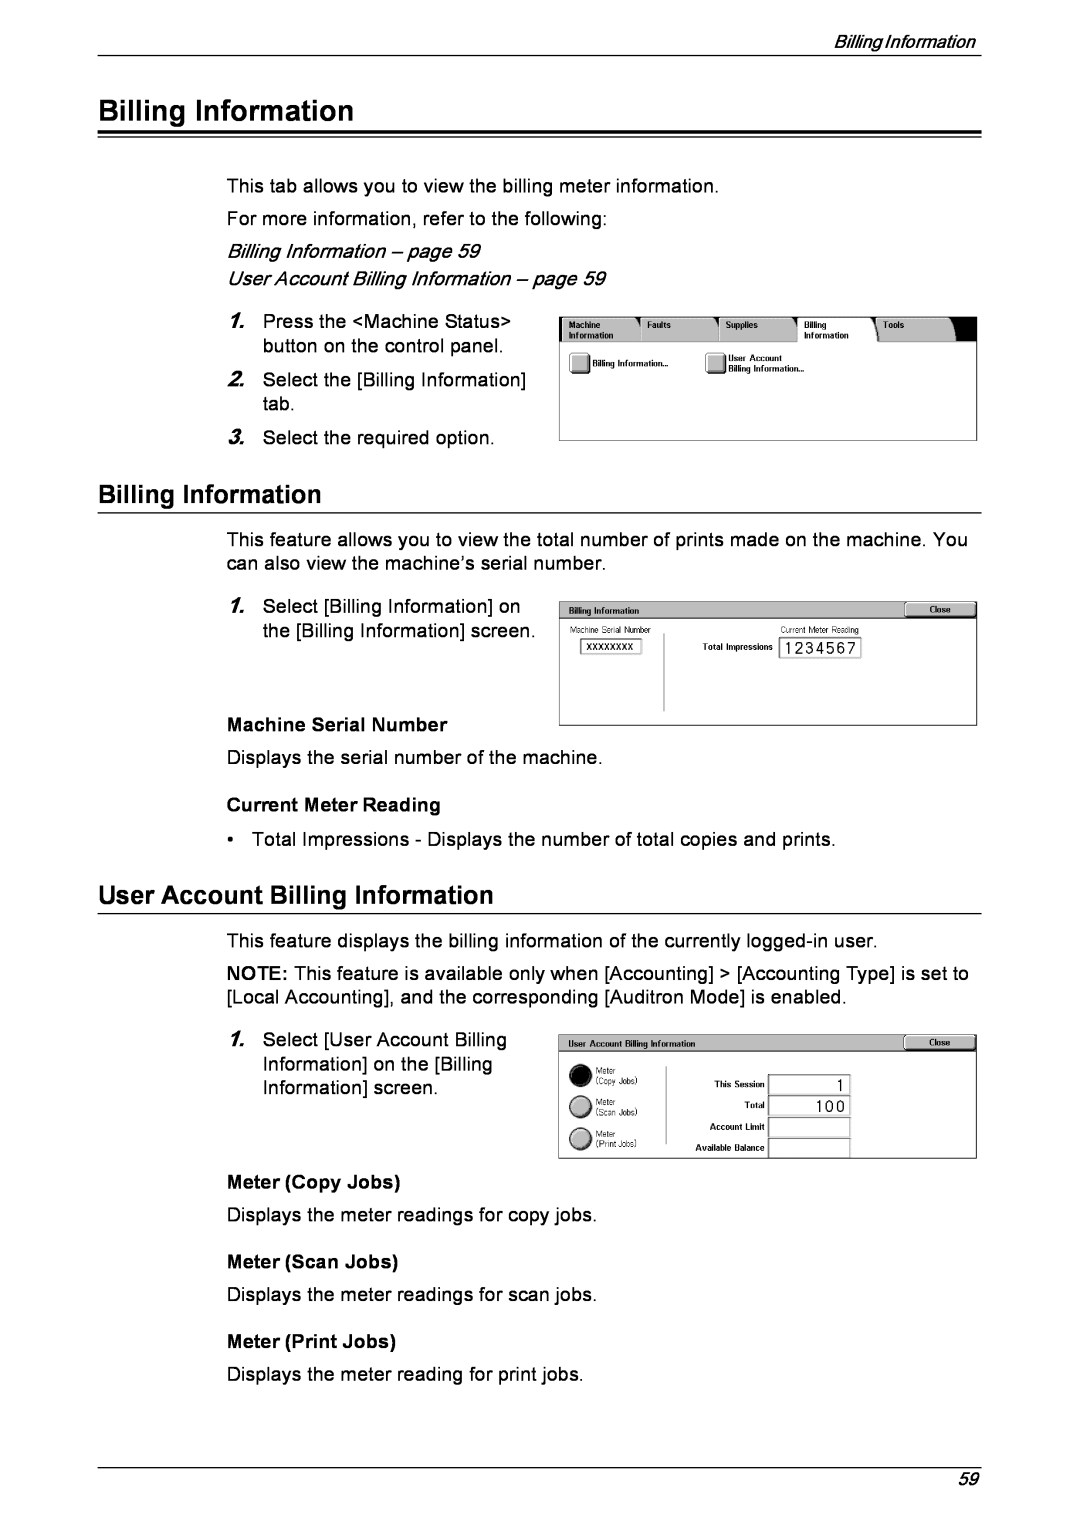 Xerox 5222 manual User Account Billing Information – page, Machine Serial Number, Current Meter Reading 